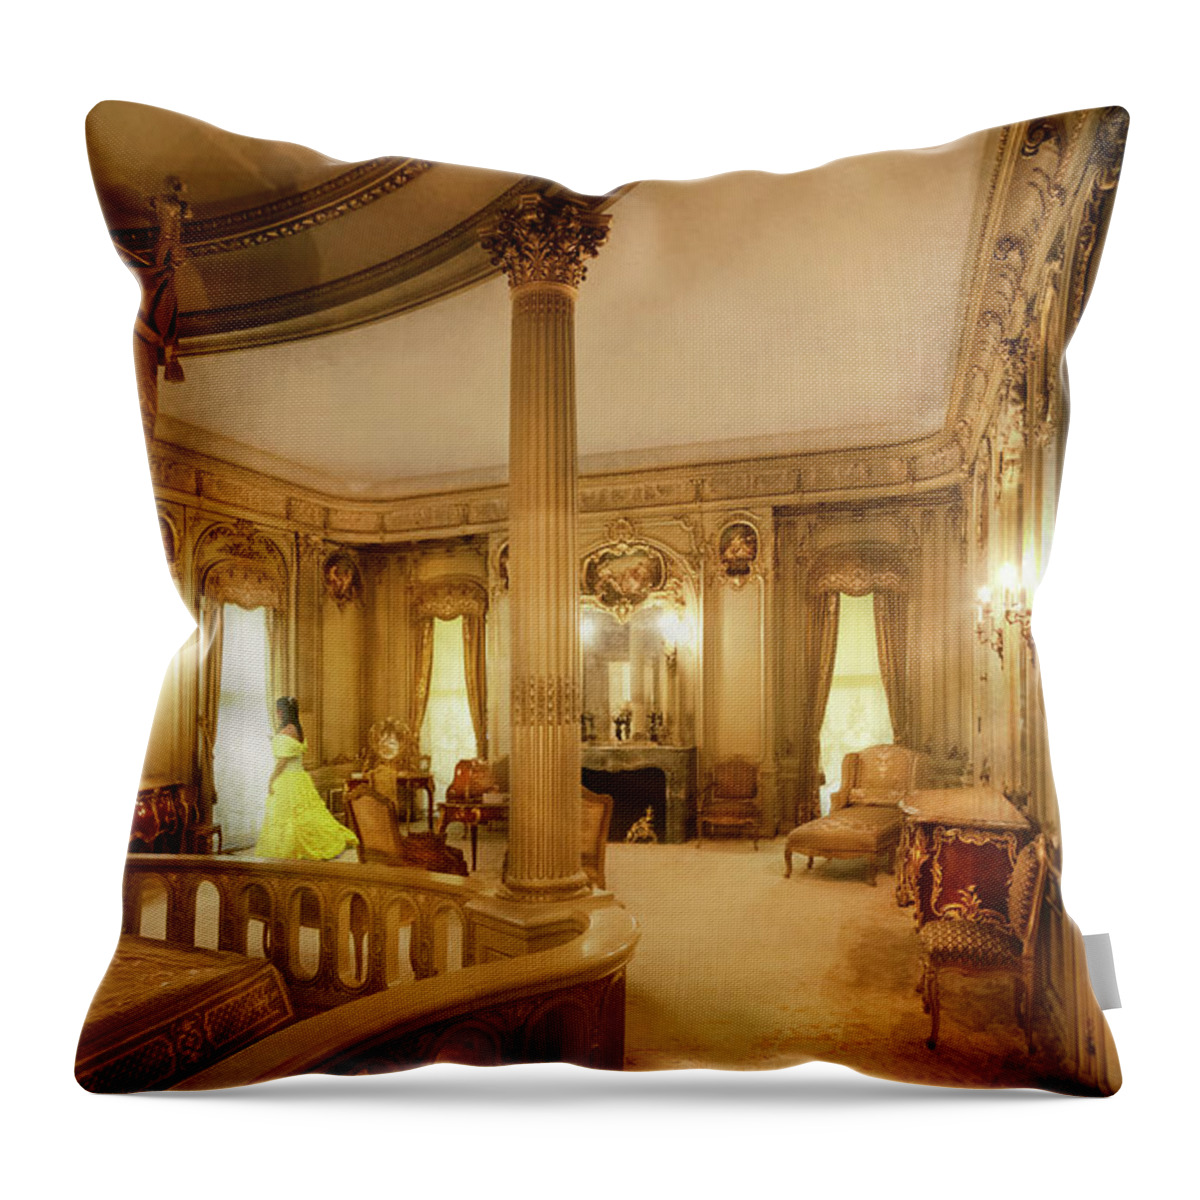 Princess Throw Pillow featuring the photograph Fantasy - In the ivory tower by Mike Savad